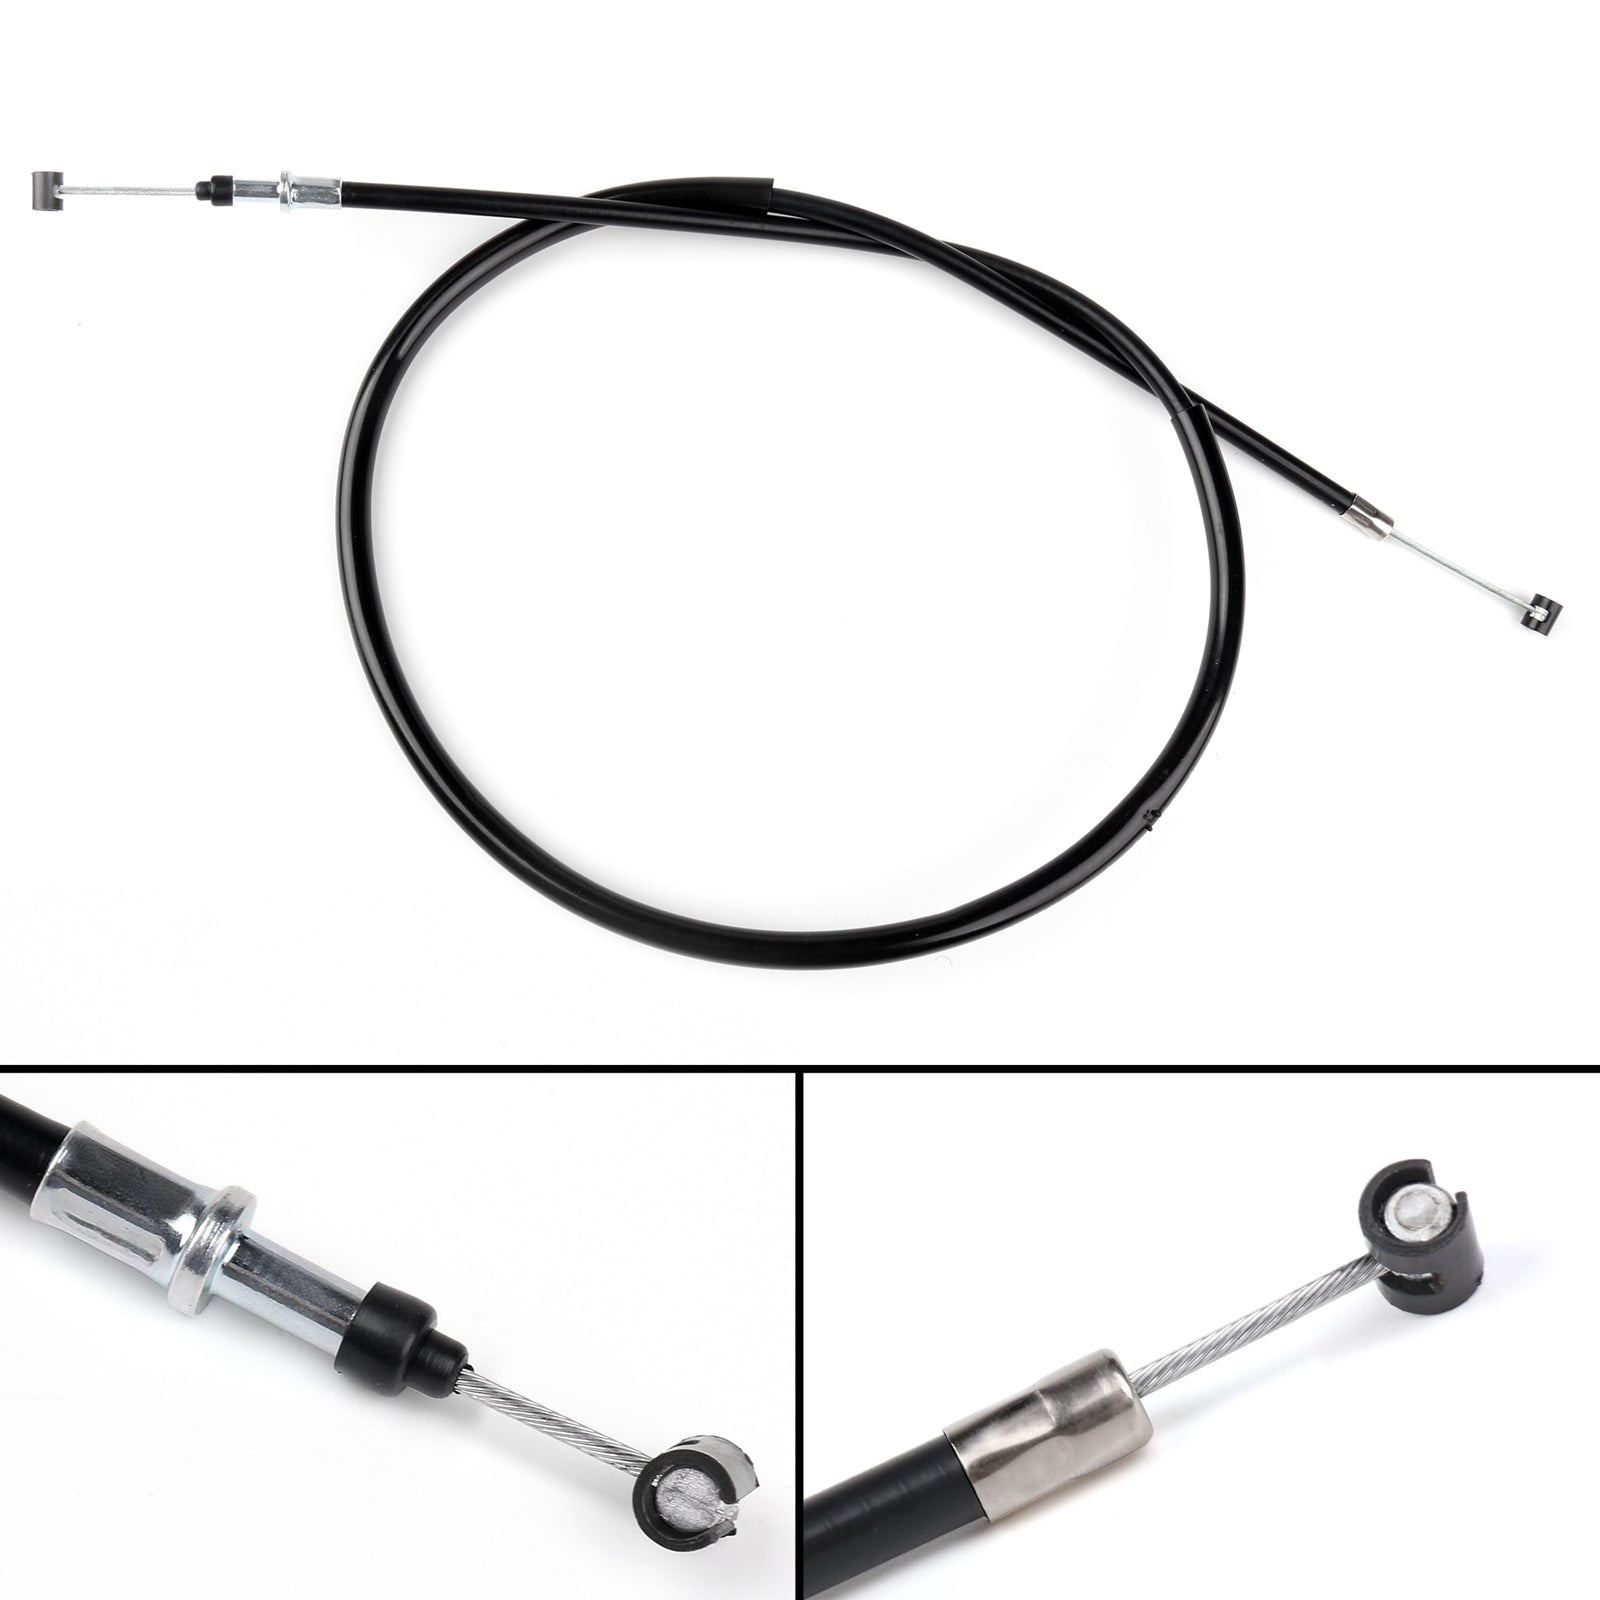 Wire Steel Clutch Cable Replacement Fit For BMW F800GS 2008-2014 F700GS 2013 F650GS 2008-2015 G650GS 2008-2010